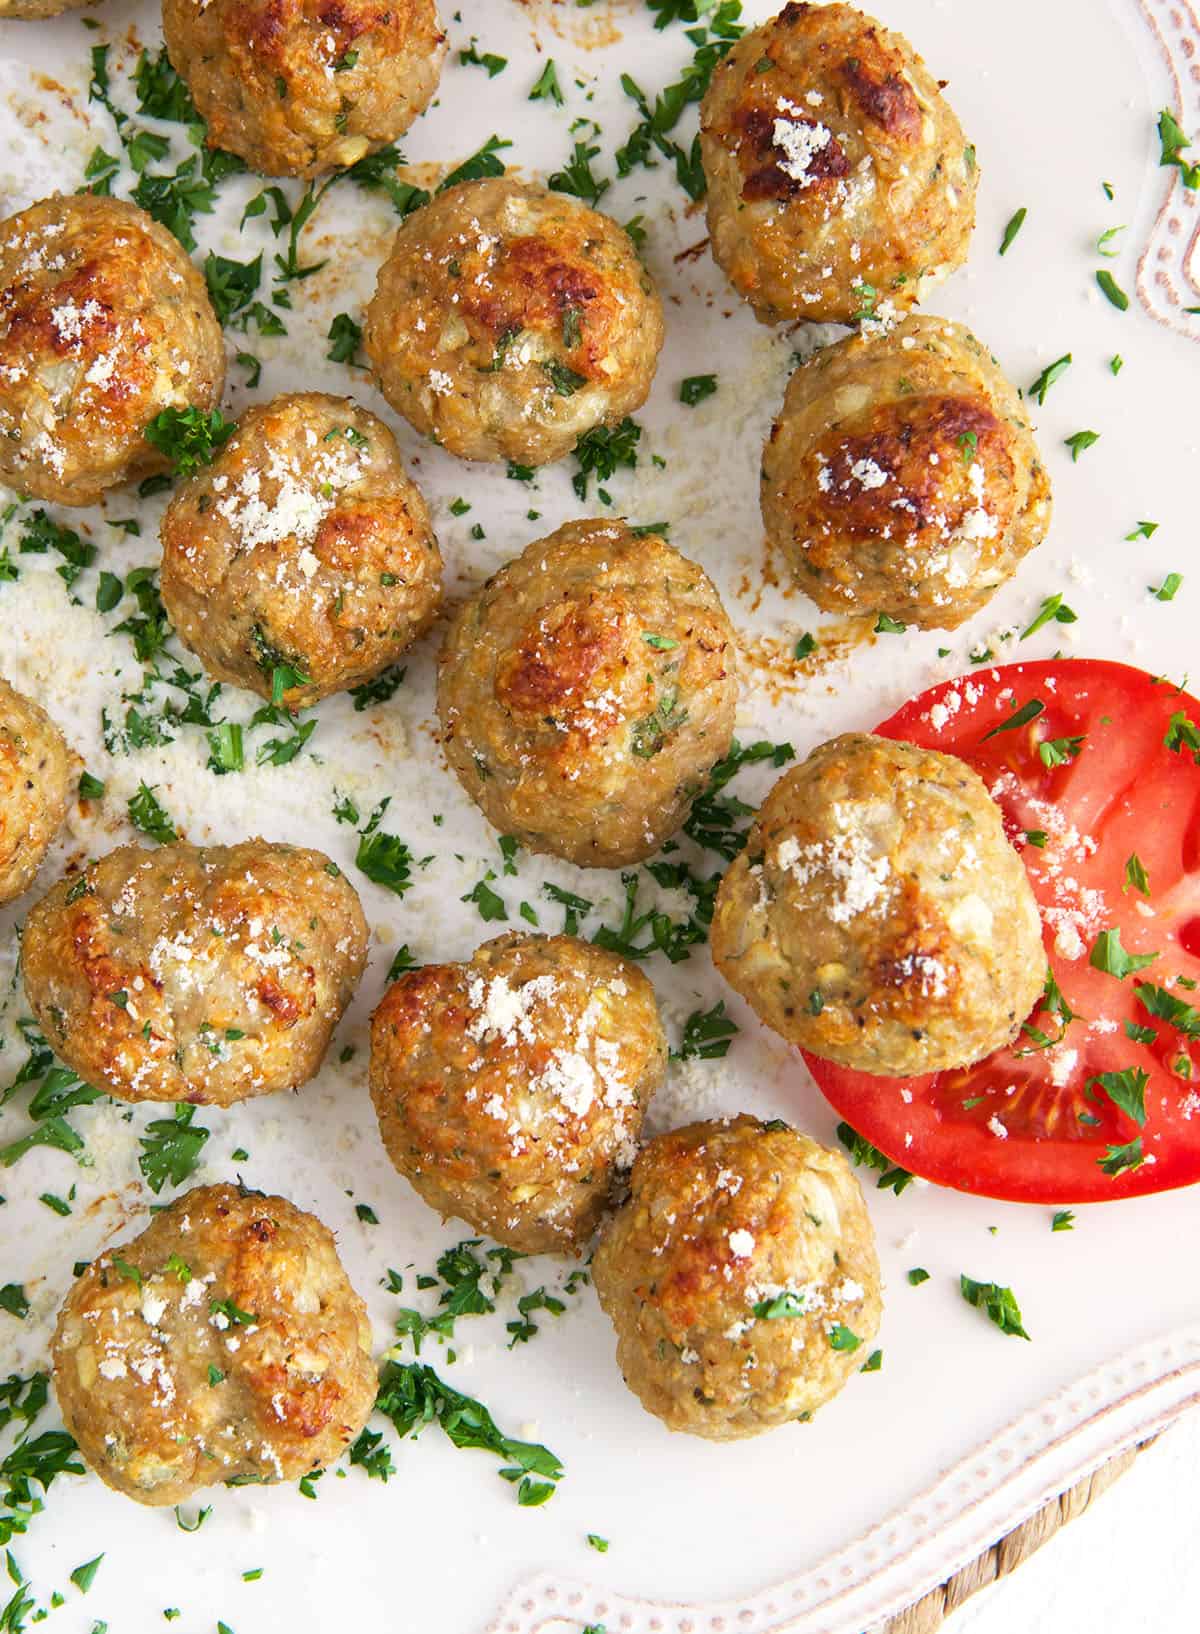 A slice of tomato is placed next to a batch of cooked meatballs. 